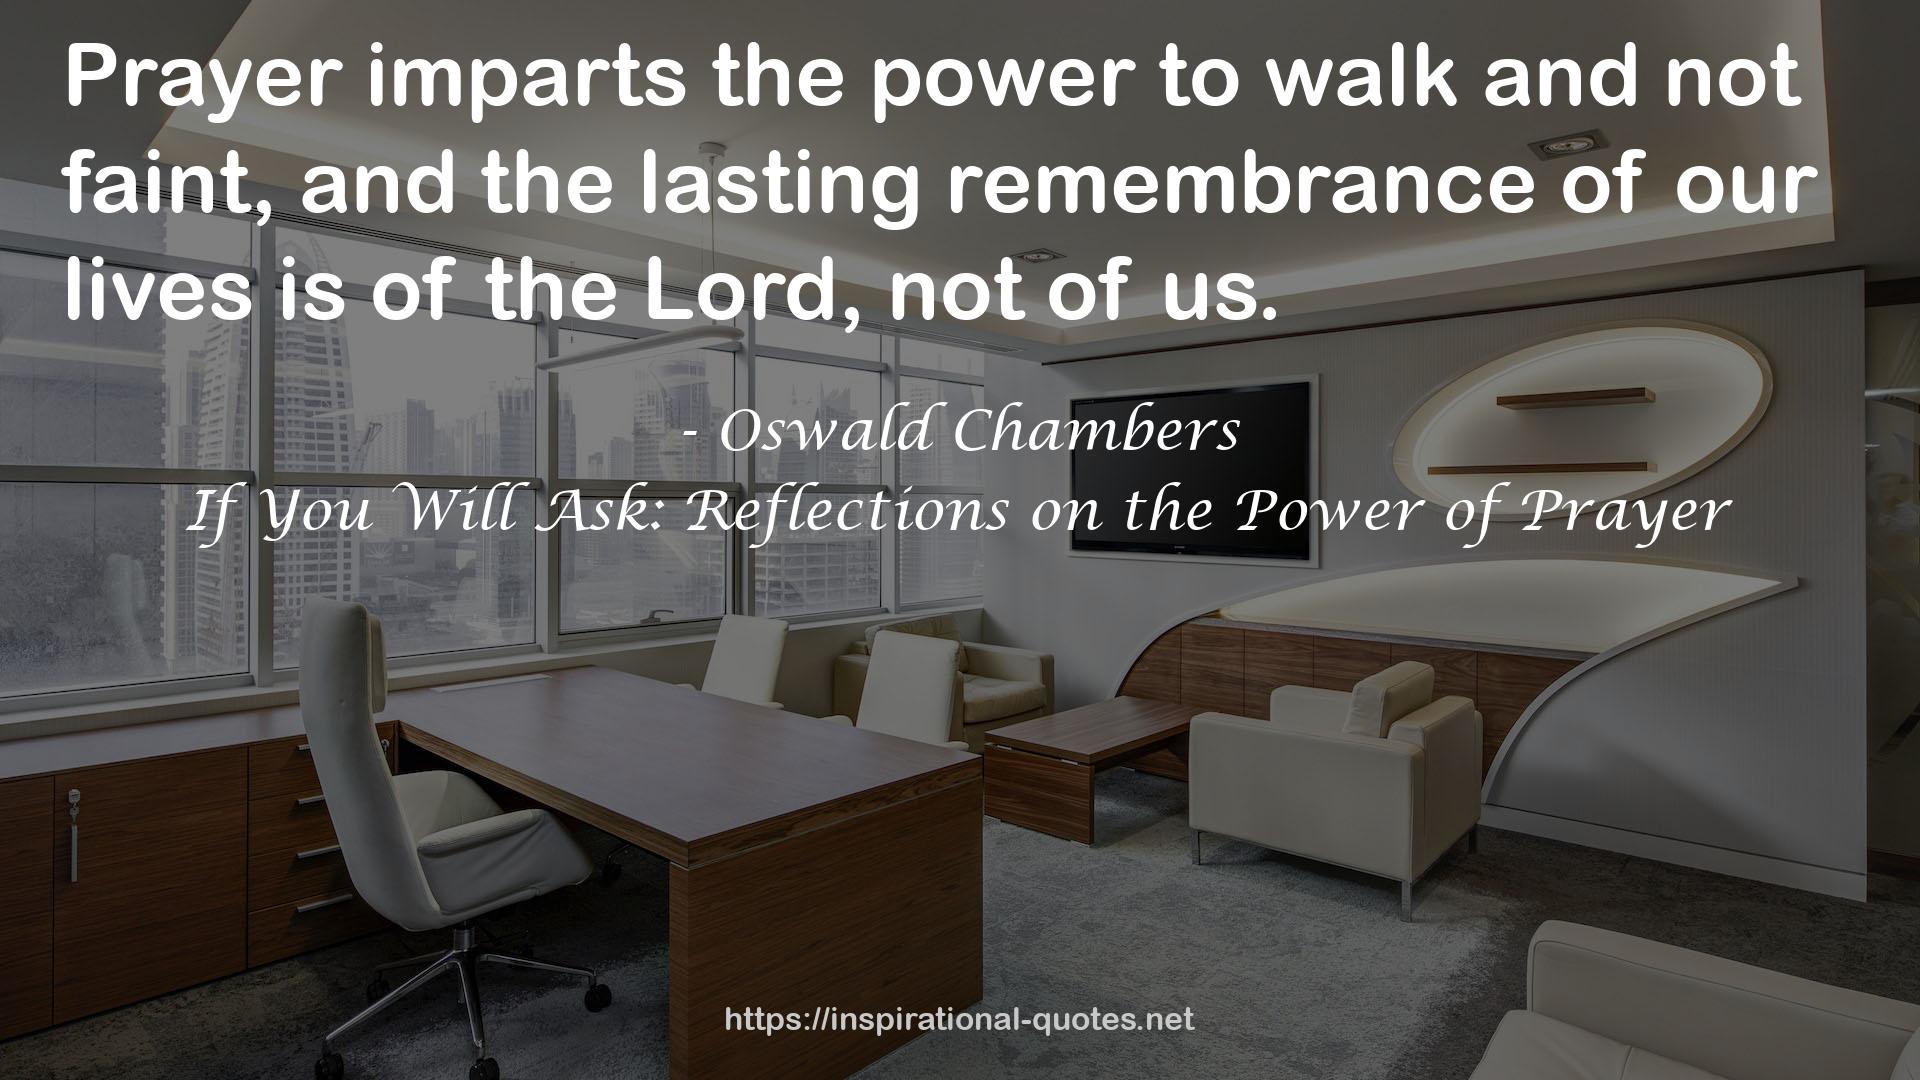 If You Will Ask: Reflections on the Power of Prayer QUOTES